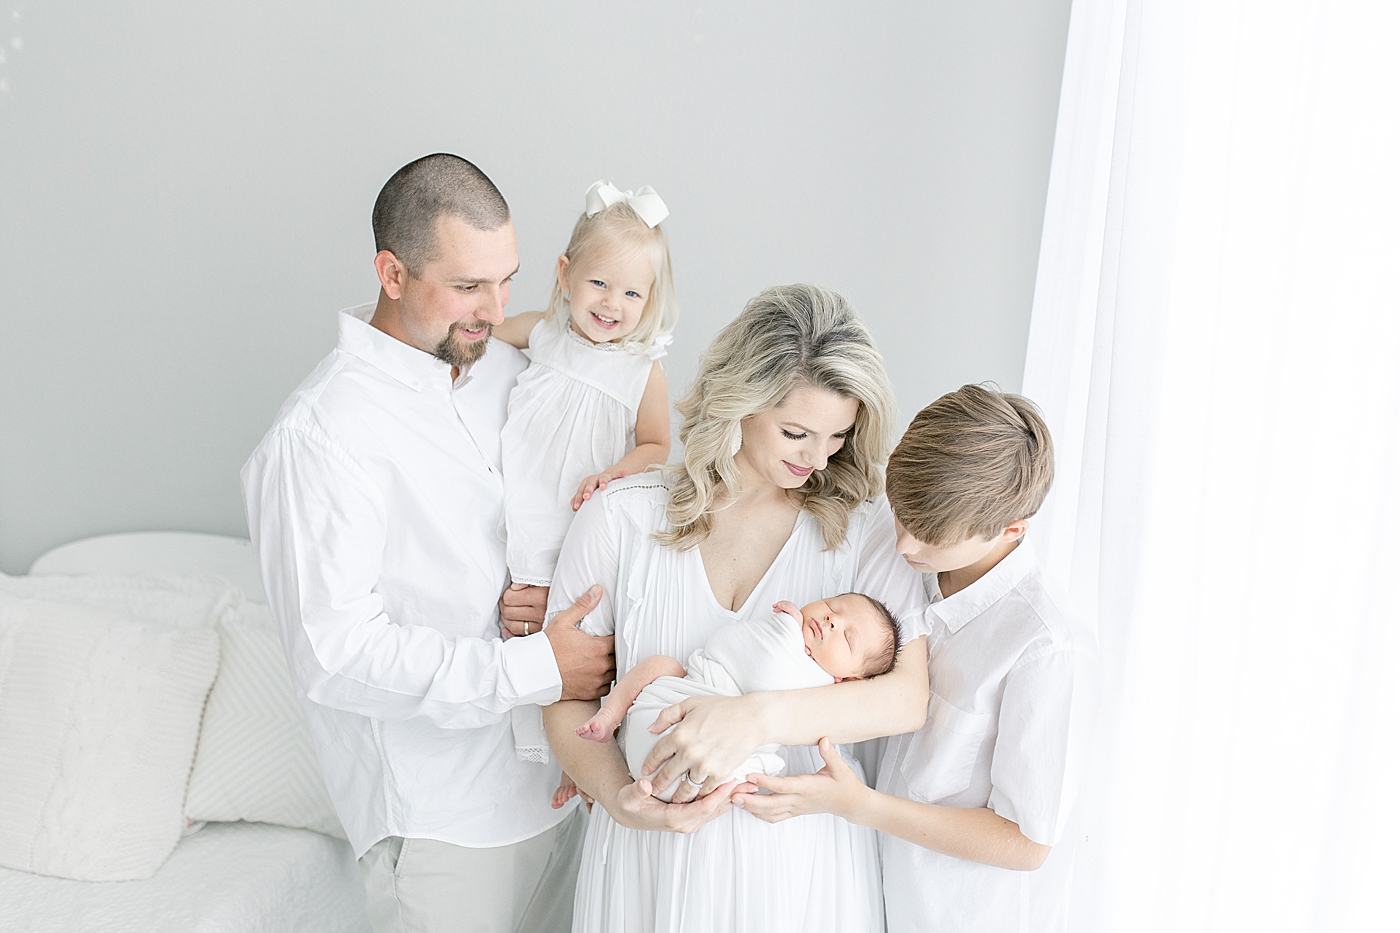 Family photo with newborn baby. Photo by Little Sunshine Photography.